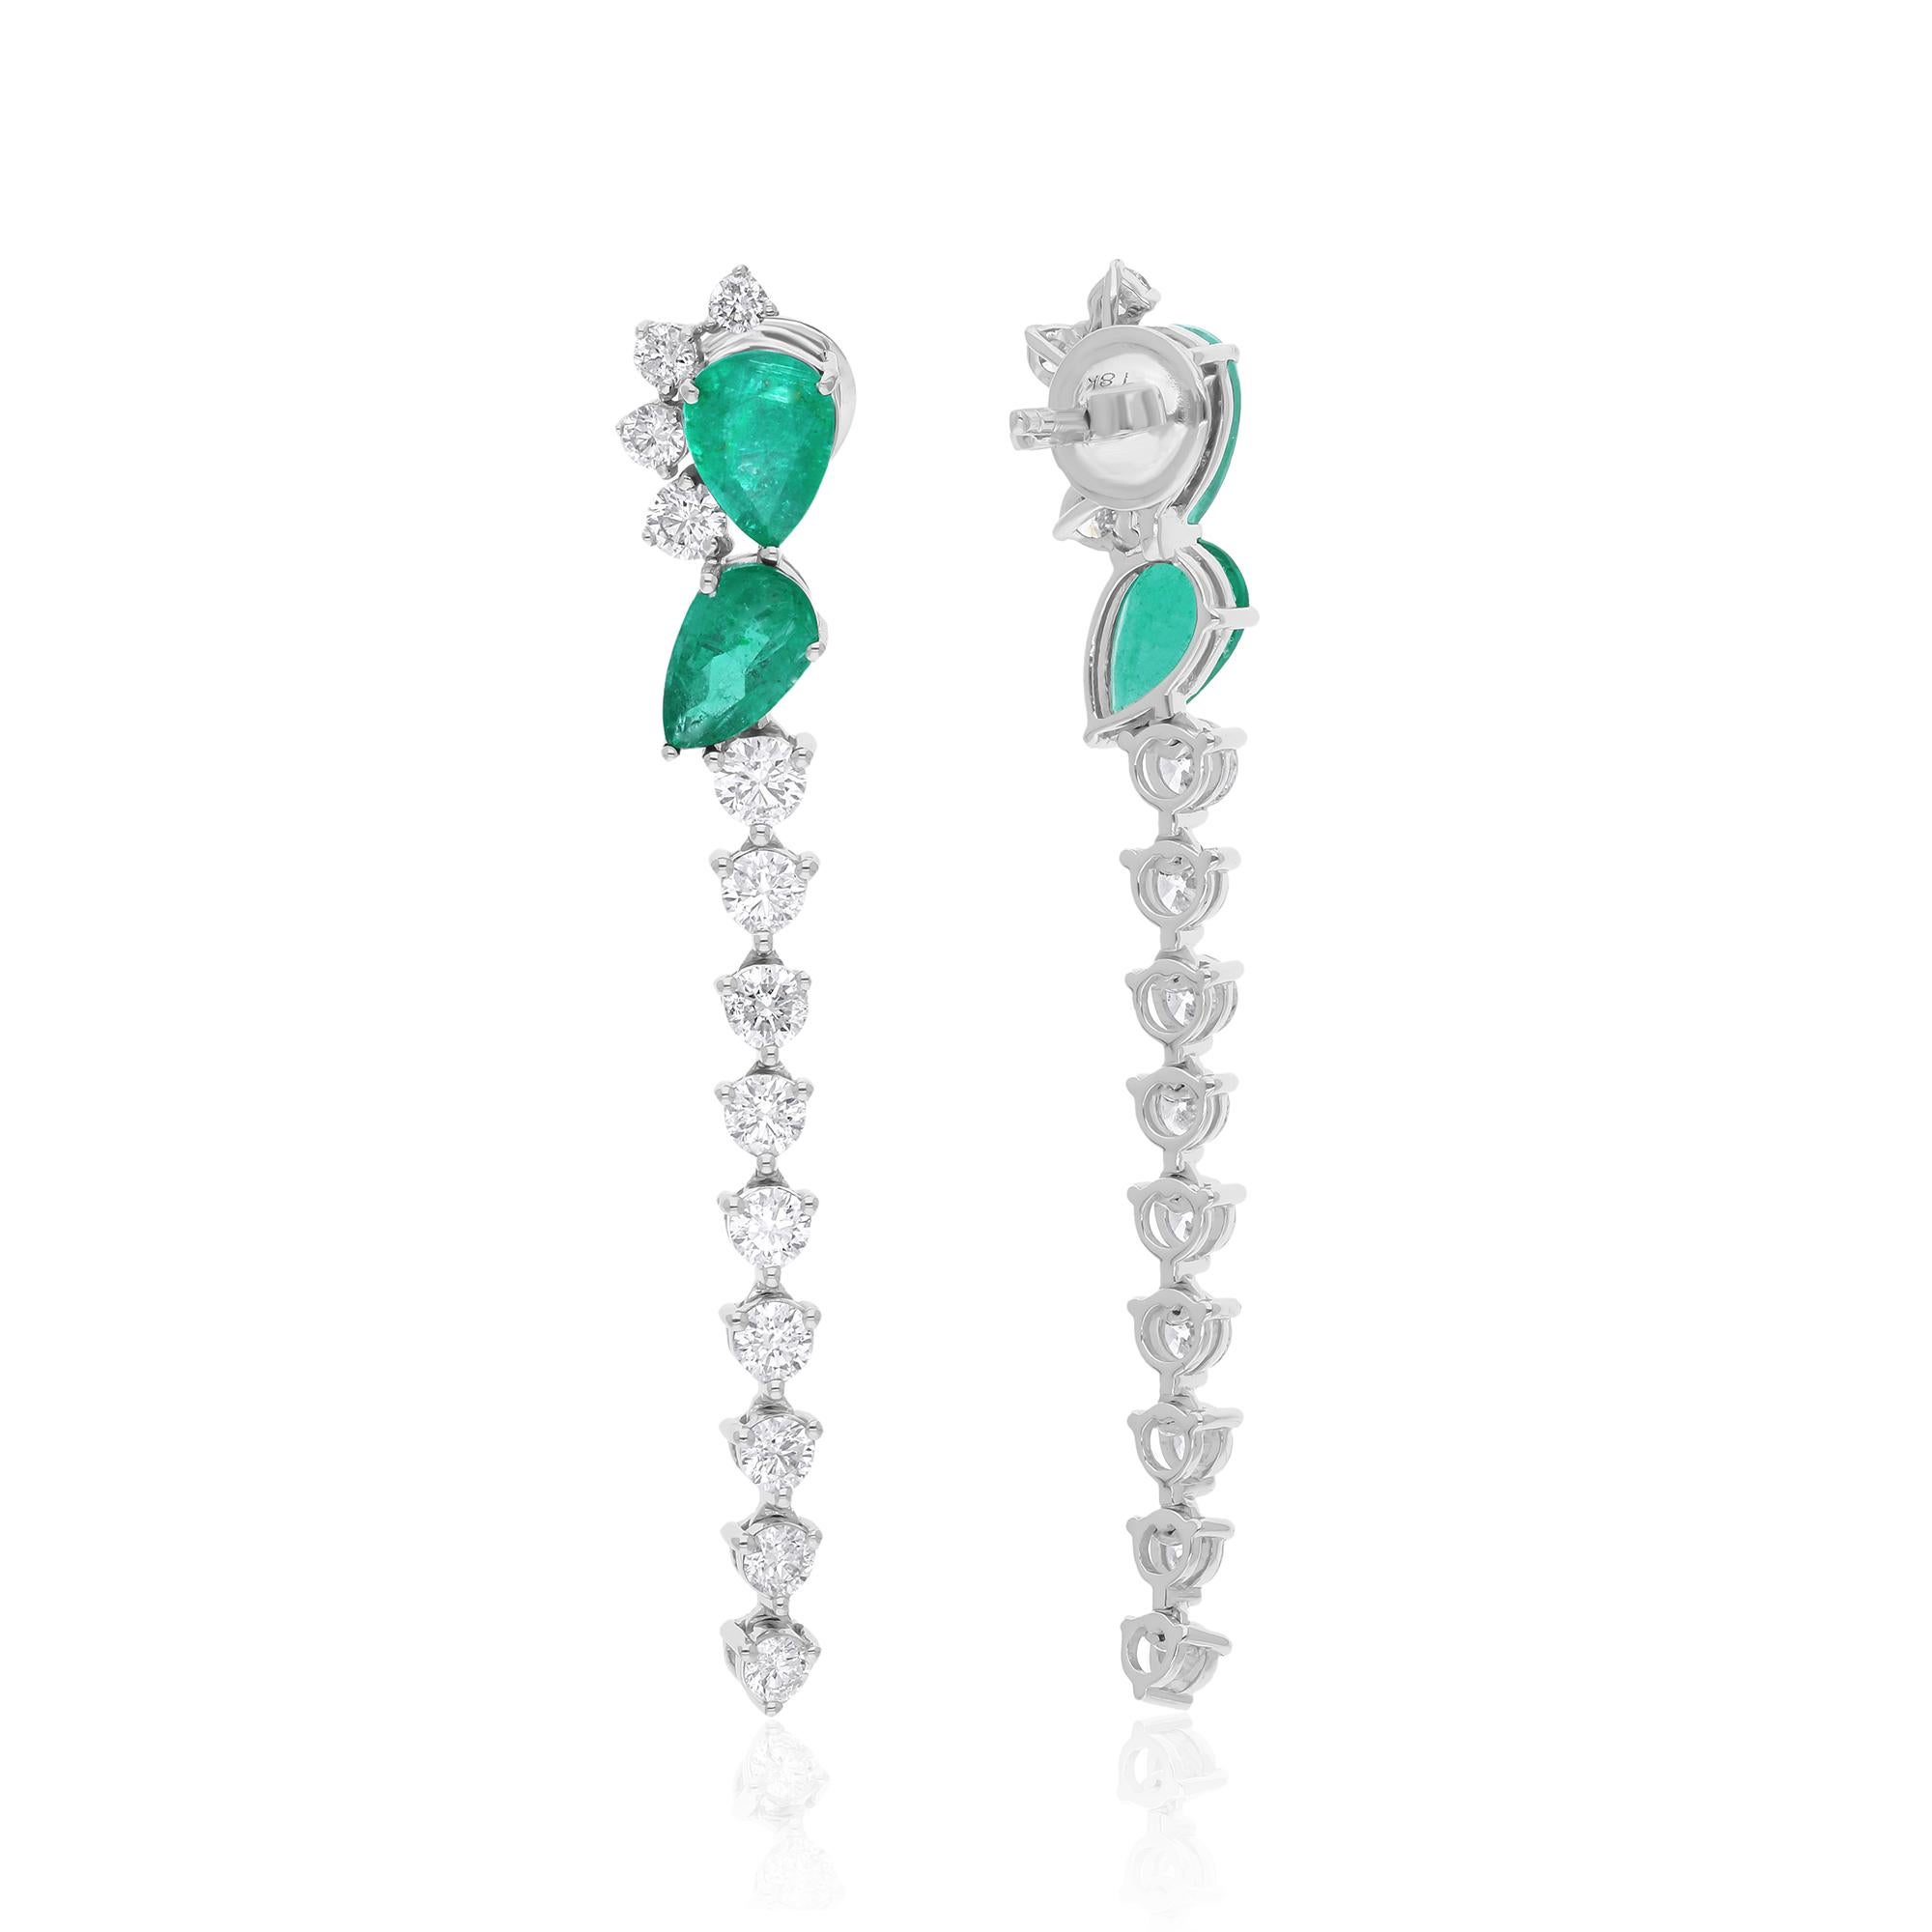 The focal point of these earrings is the Zambian emerald, renowned for its lush green hue and unparalleled clarity. Mined from the rich emerald fields of Zambia, each gemstone exudes natural beauty and sophistication, making it a cherished addition